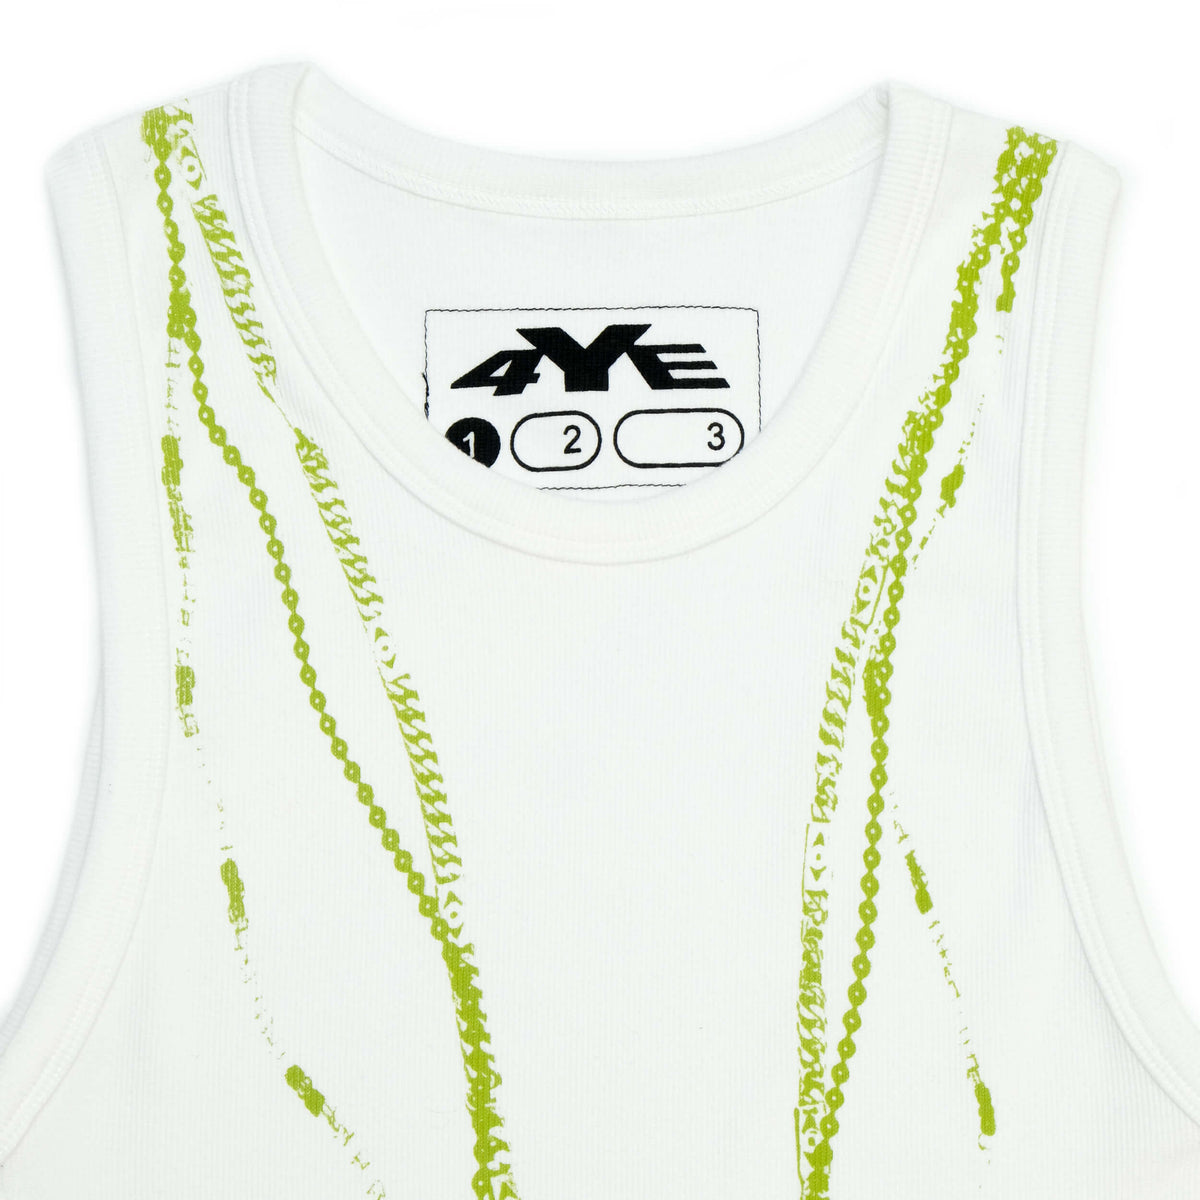 Detail image of the 4YE Trompe L'oiel tank in white showing up close image of the chain detail screen printed in green.